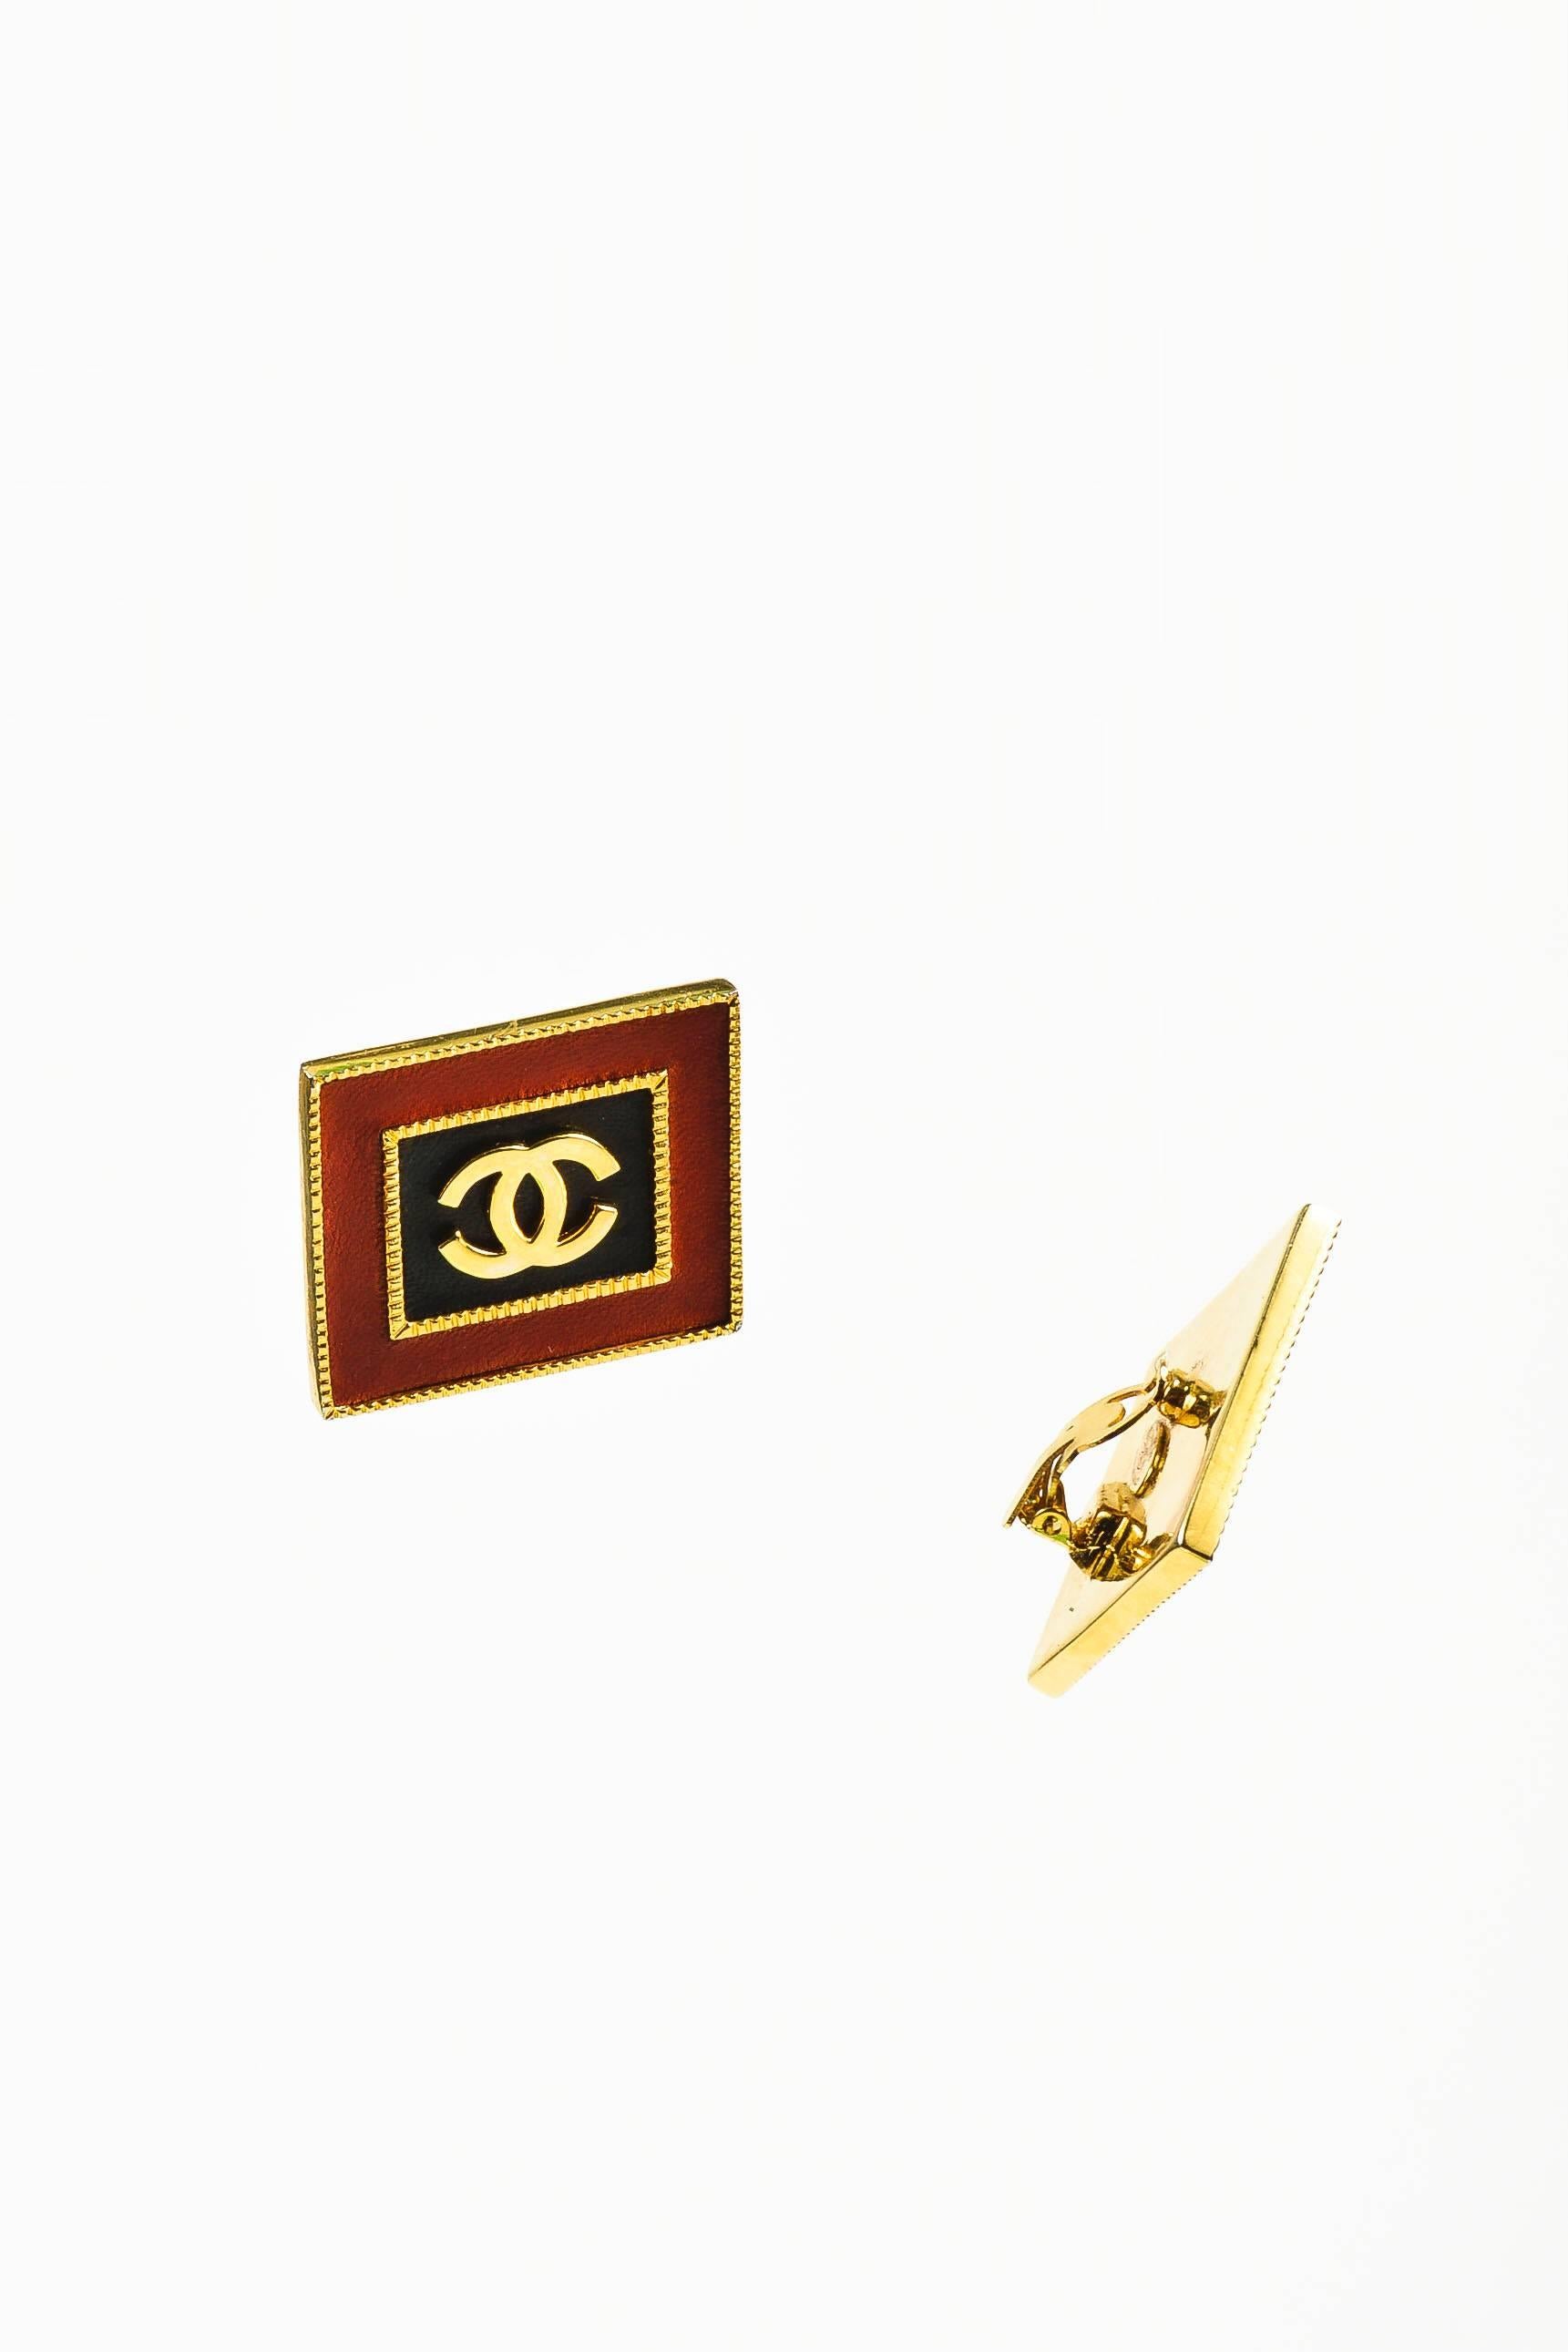 Comes with box. Vintage Chanel earrings from Collection 26, circa 1989. This very rare design emulates the exaggerated style of the 80's. With a tailored blouse or slouchy t-shirt, these unique earrings add instant style cred to any ensemble. Square